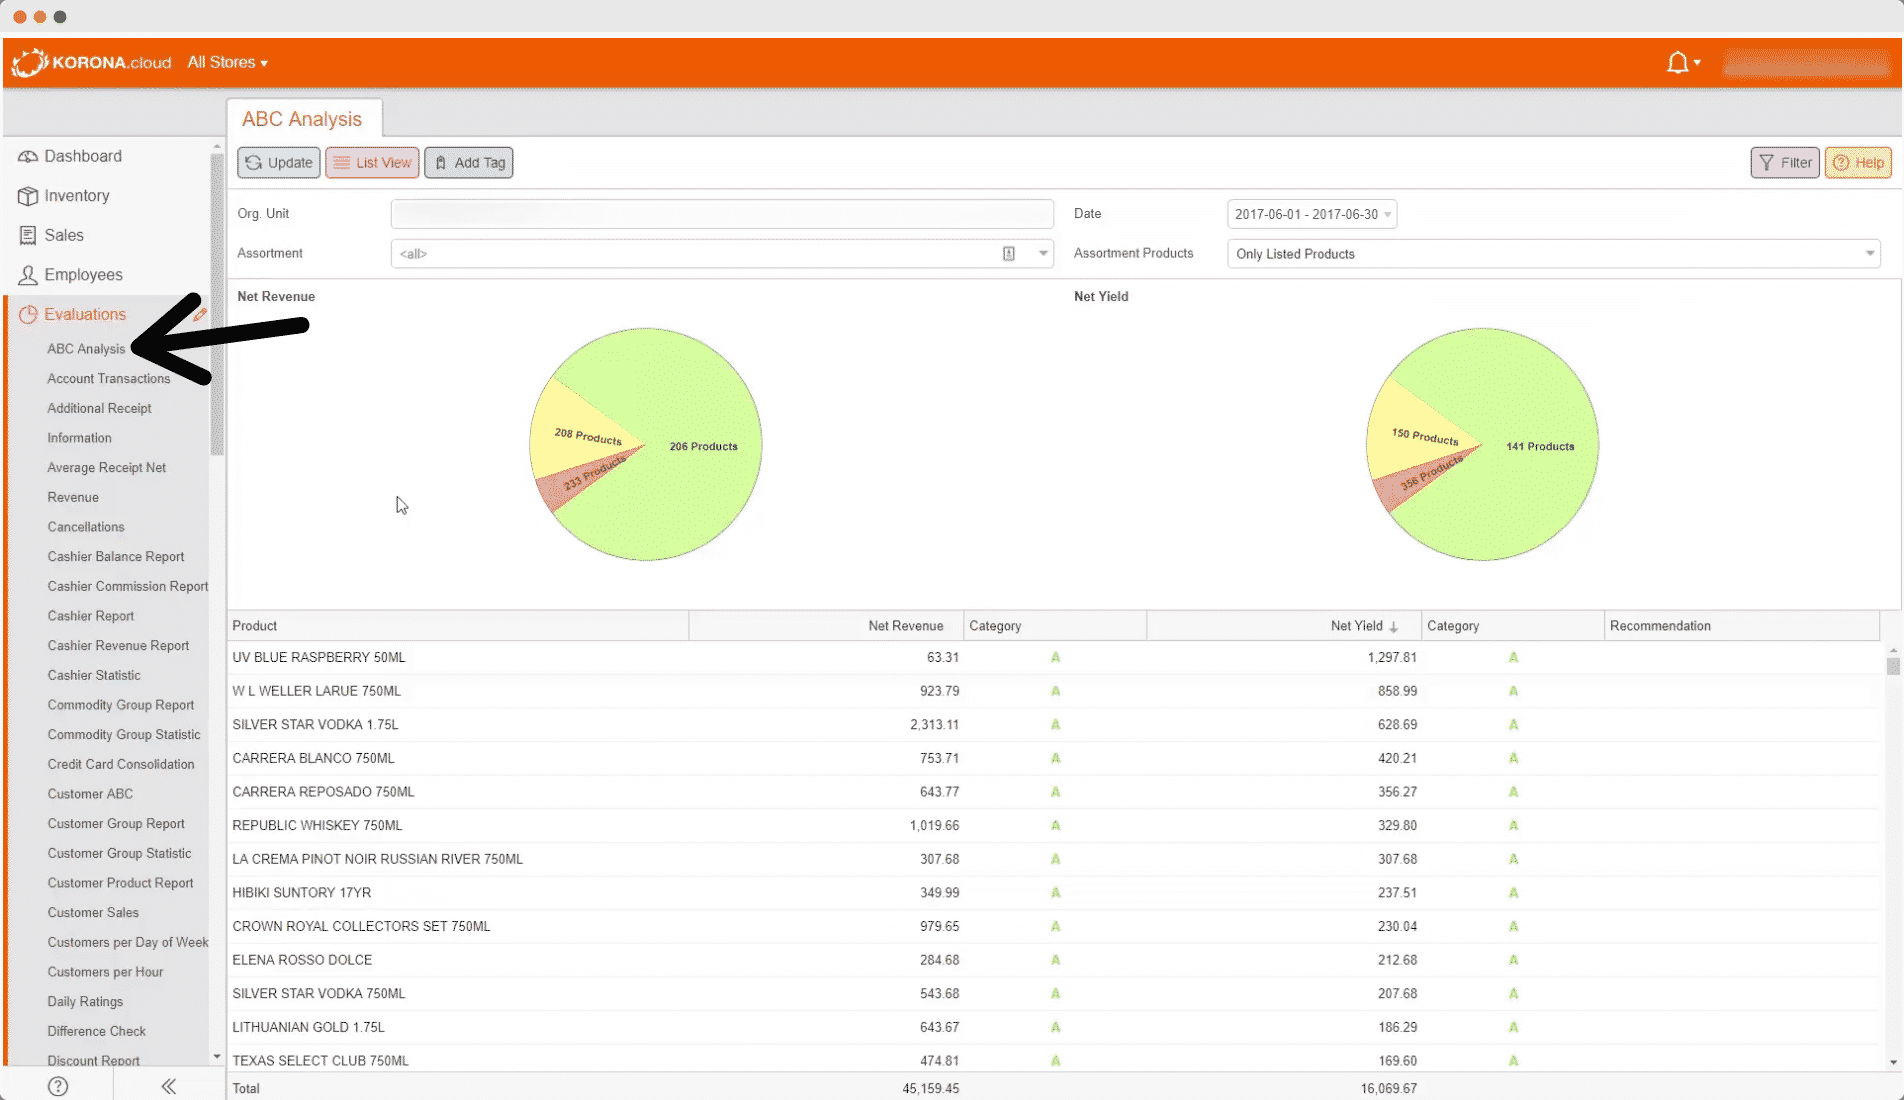 Image showing the ABC analysis dashboard of the KORONA POS software